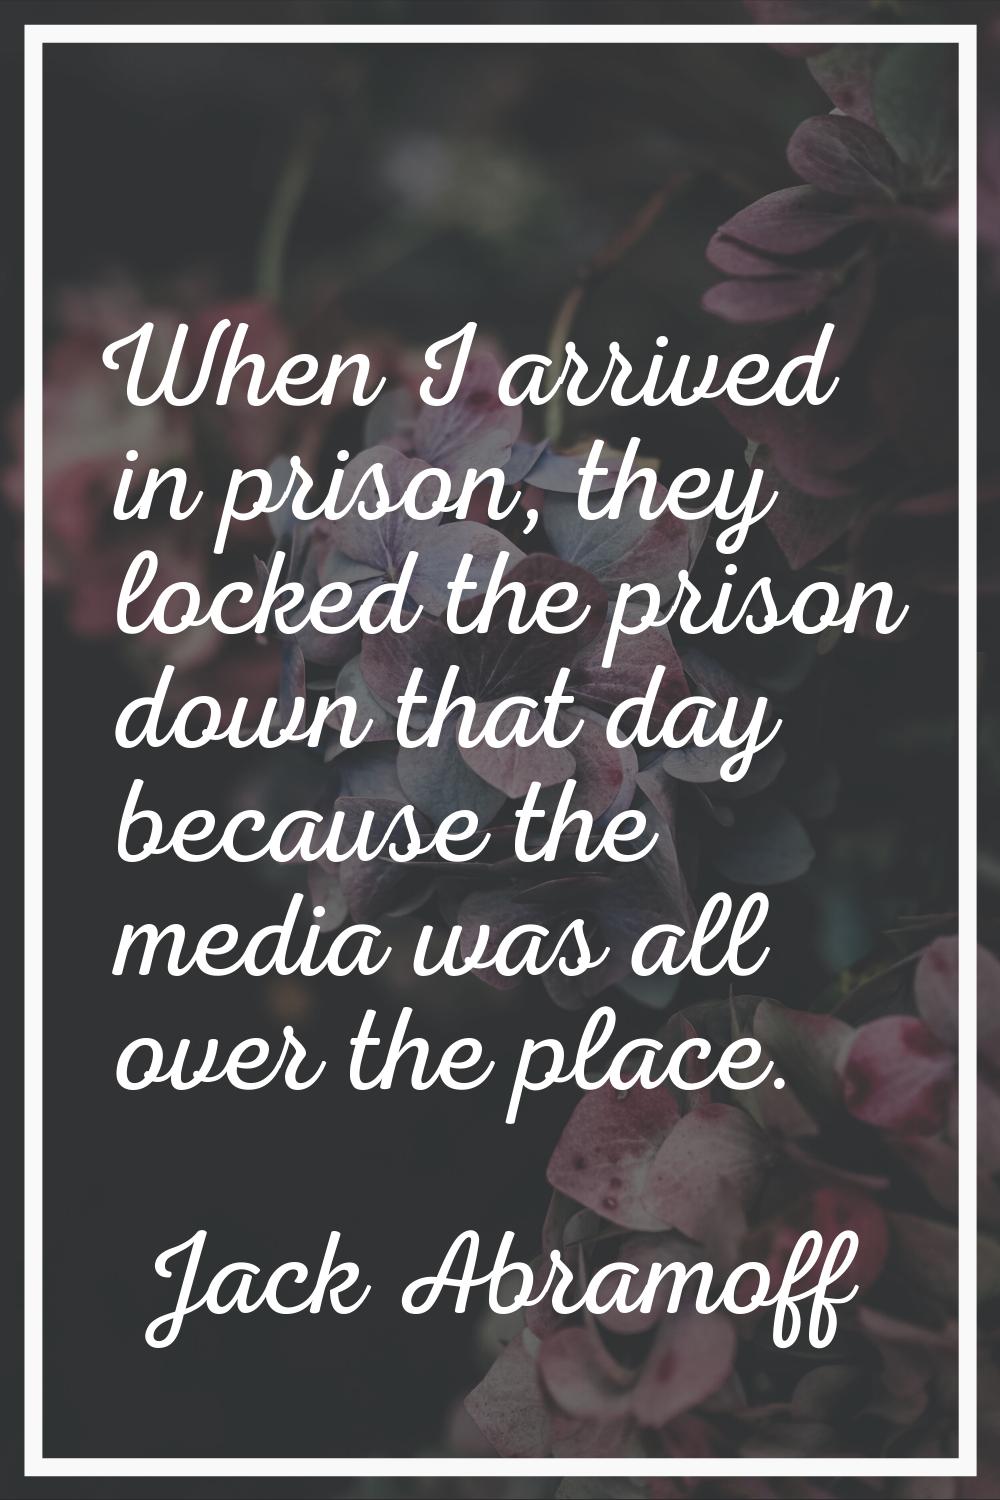 When I arrived in prison, they locked the prison down that day because the media was all over the p